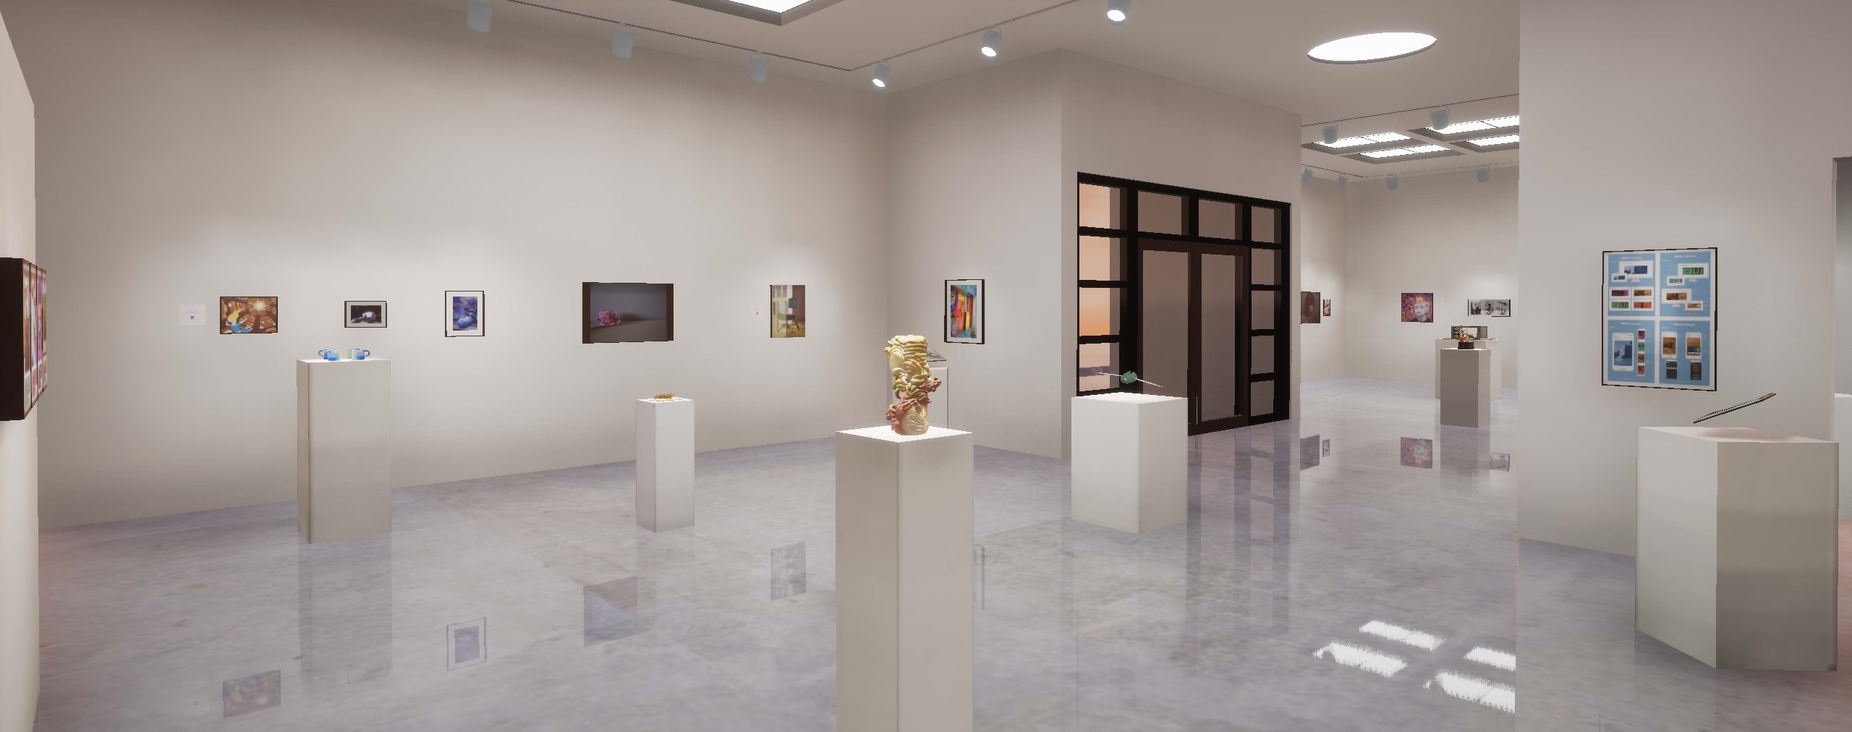 Installation View, Front West Gallery, Polykroma 2020 Exhibition, Sept. 1, 2020 to Dec. 1, 2020.